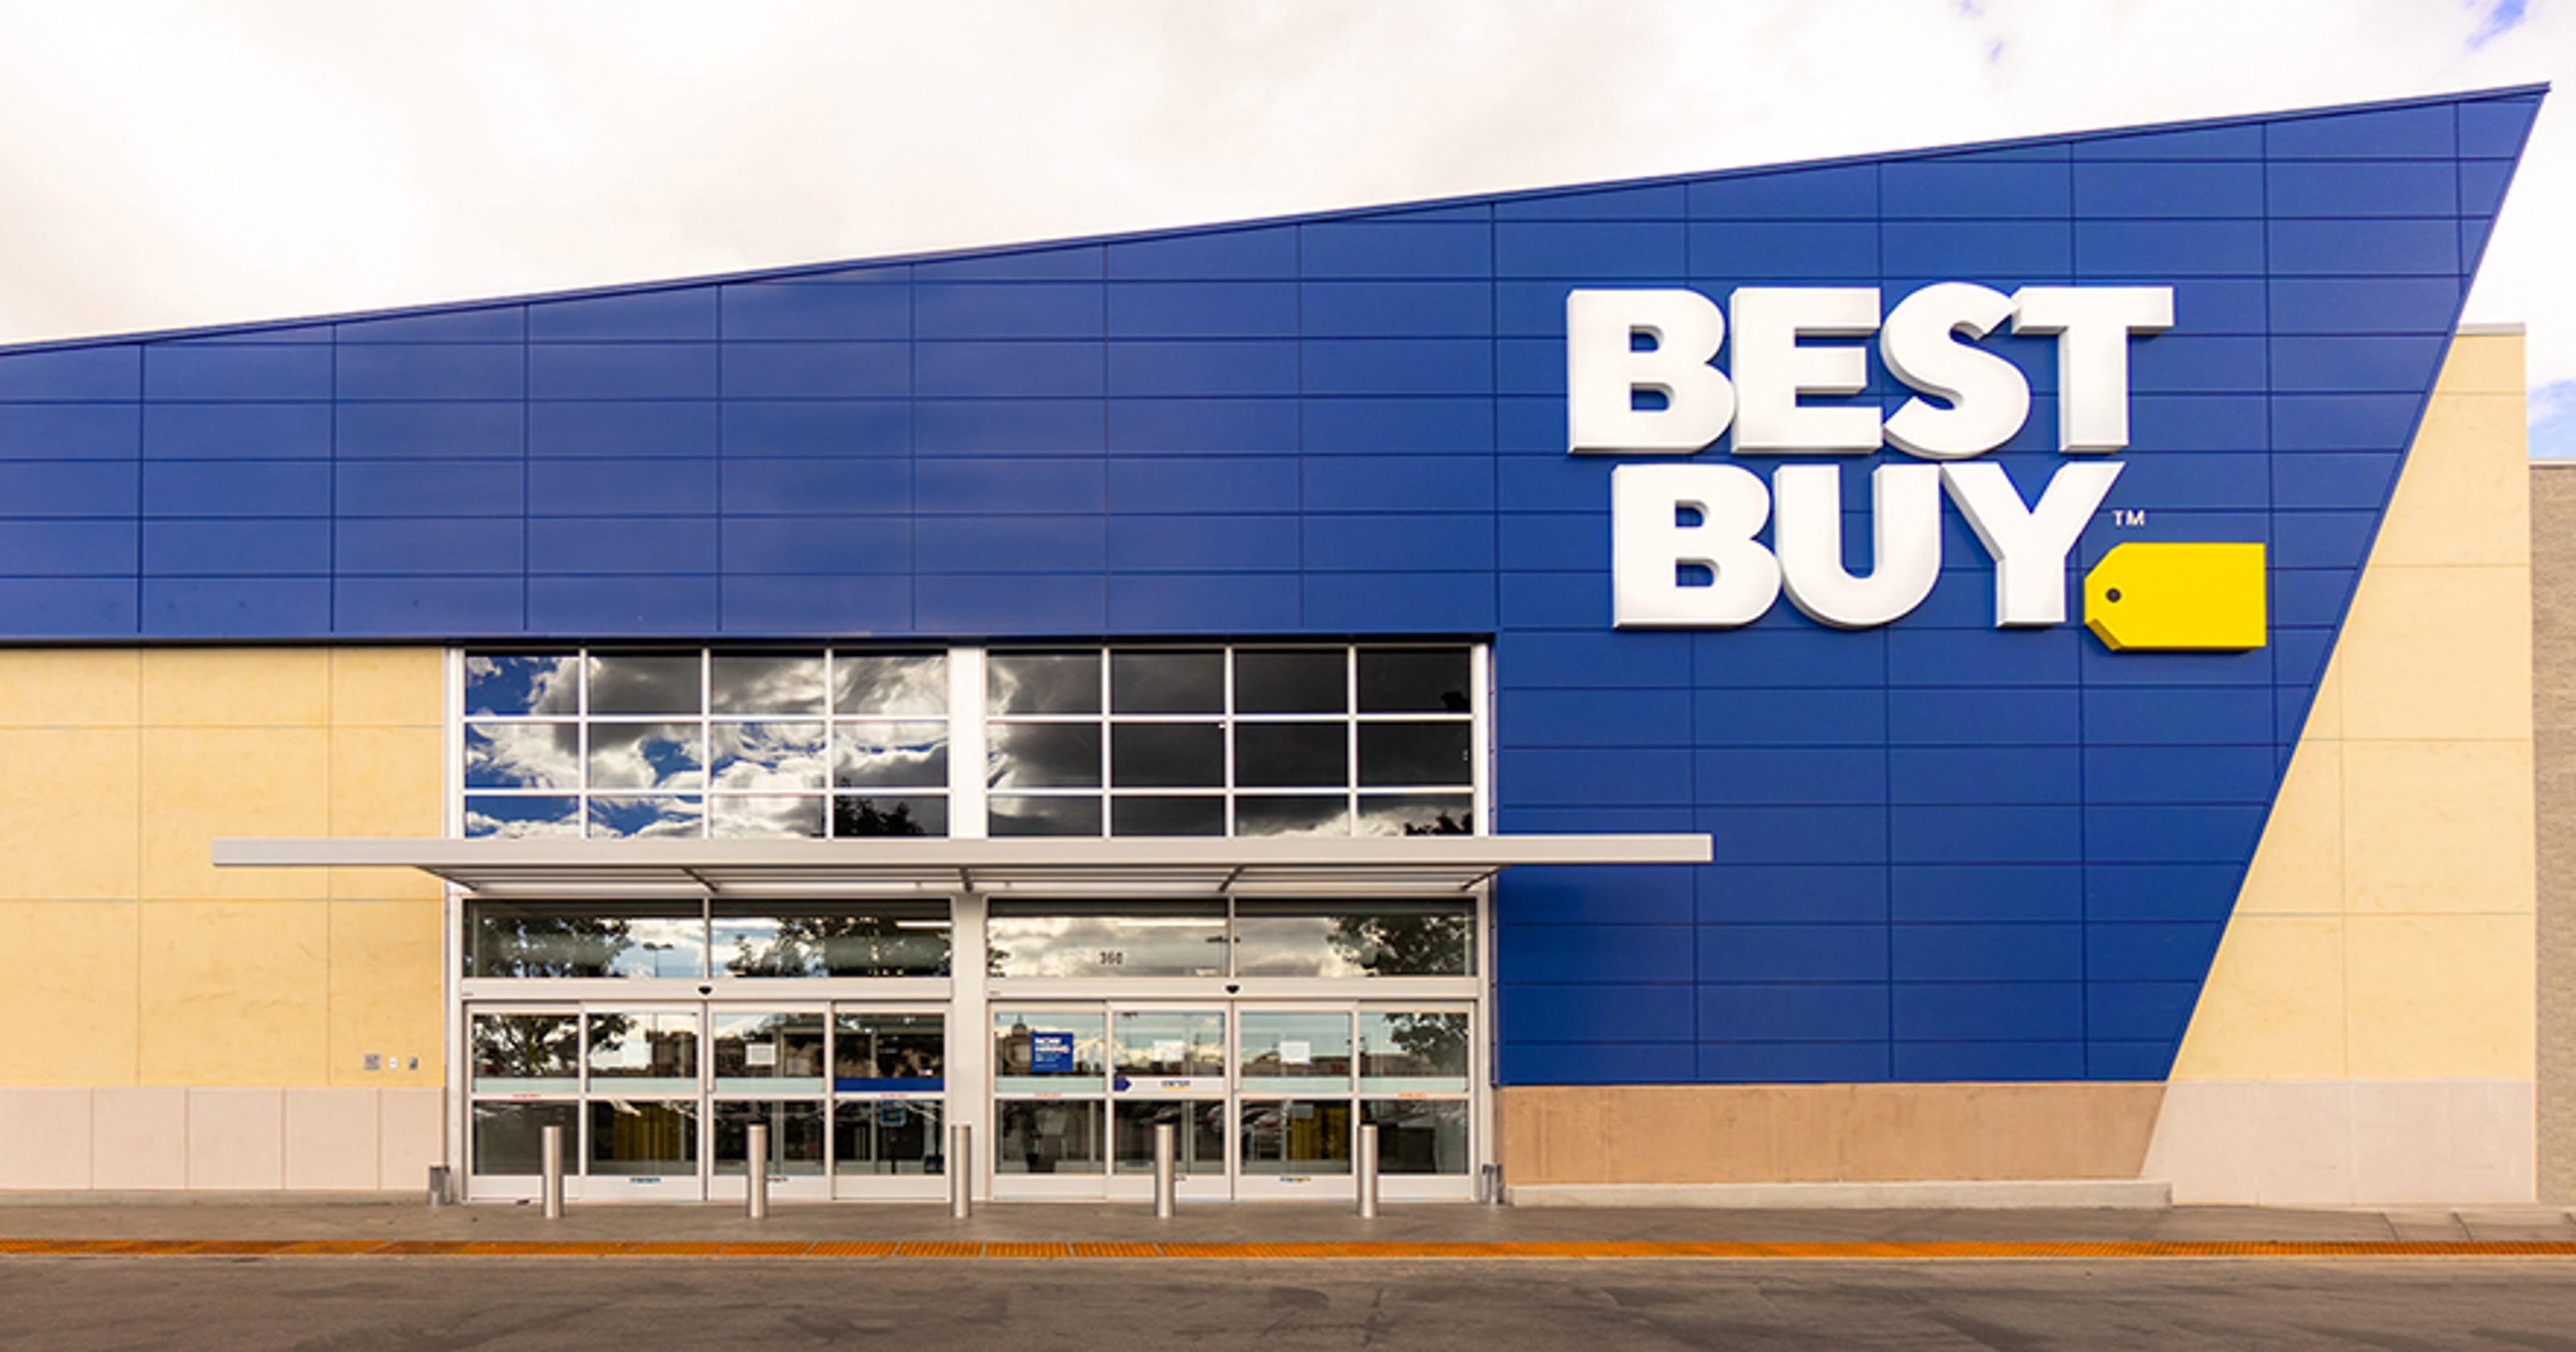 Black Friday 2018 Best Buy will have huge discounts on TVs and other